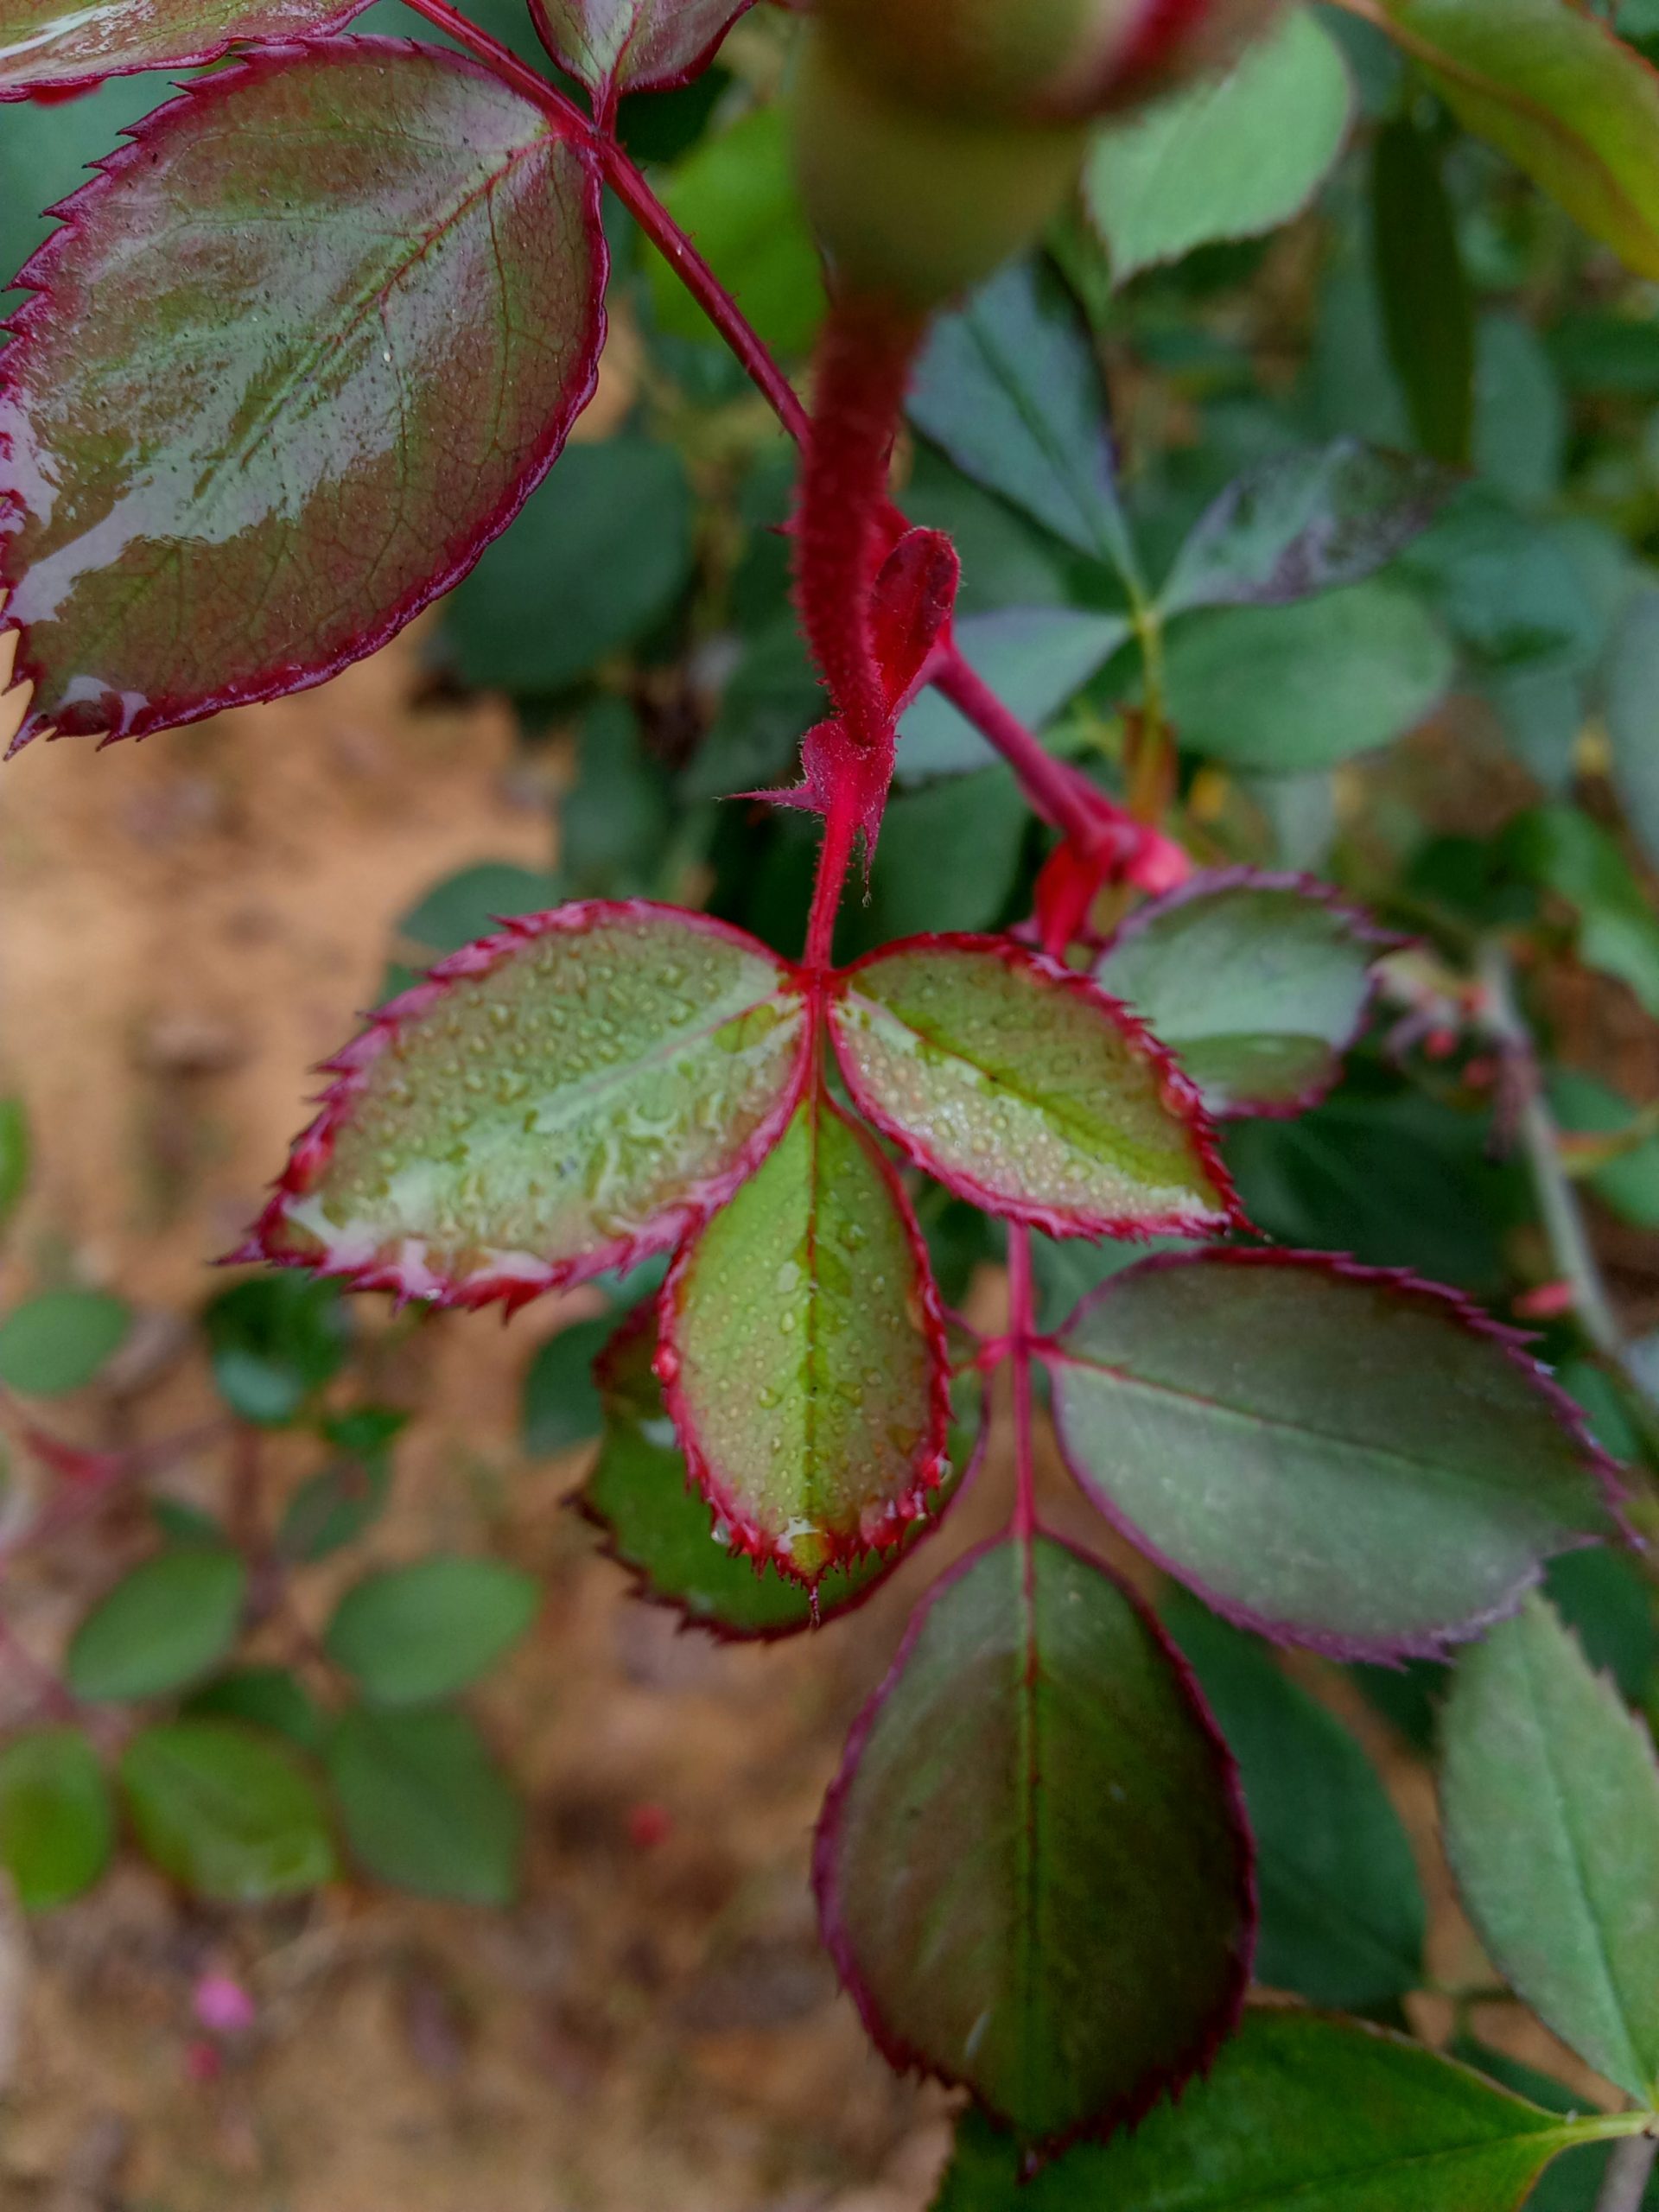 Wet leaves of a rose plant